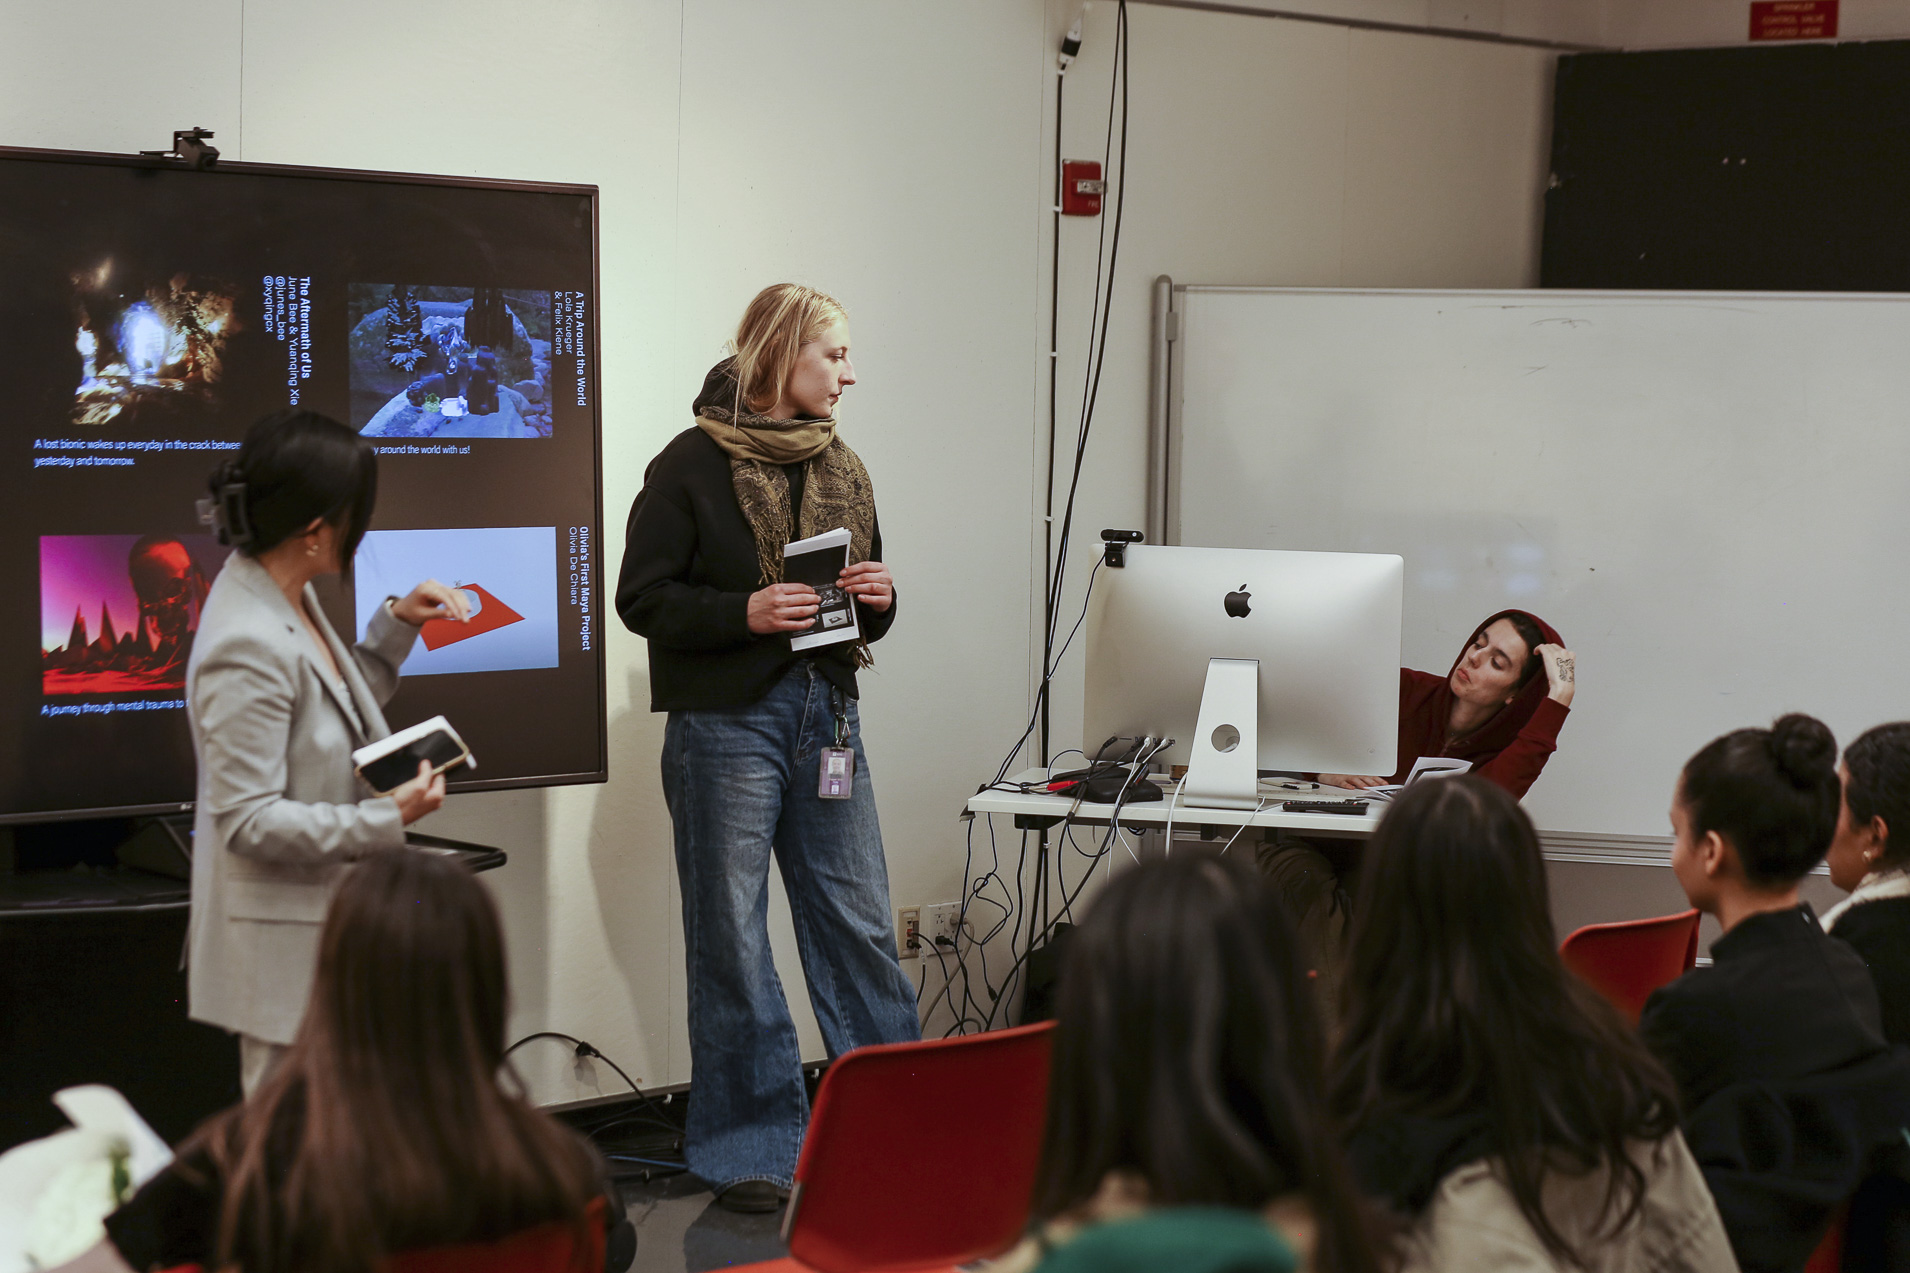 Professor Snow Fu and student Cora Rafe both stand near a television while another student sits in front of a computer and other students are seated nearby